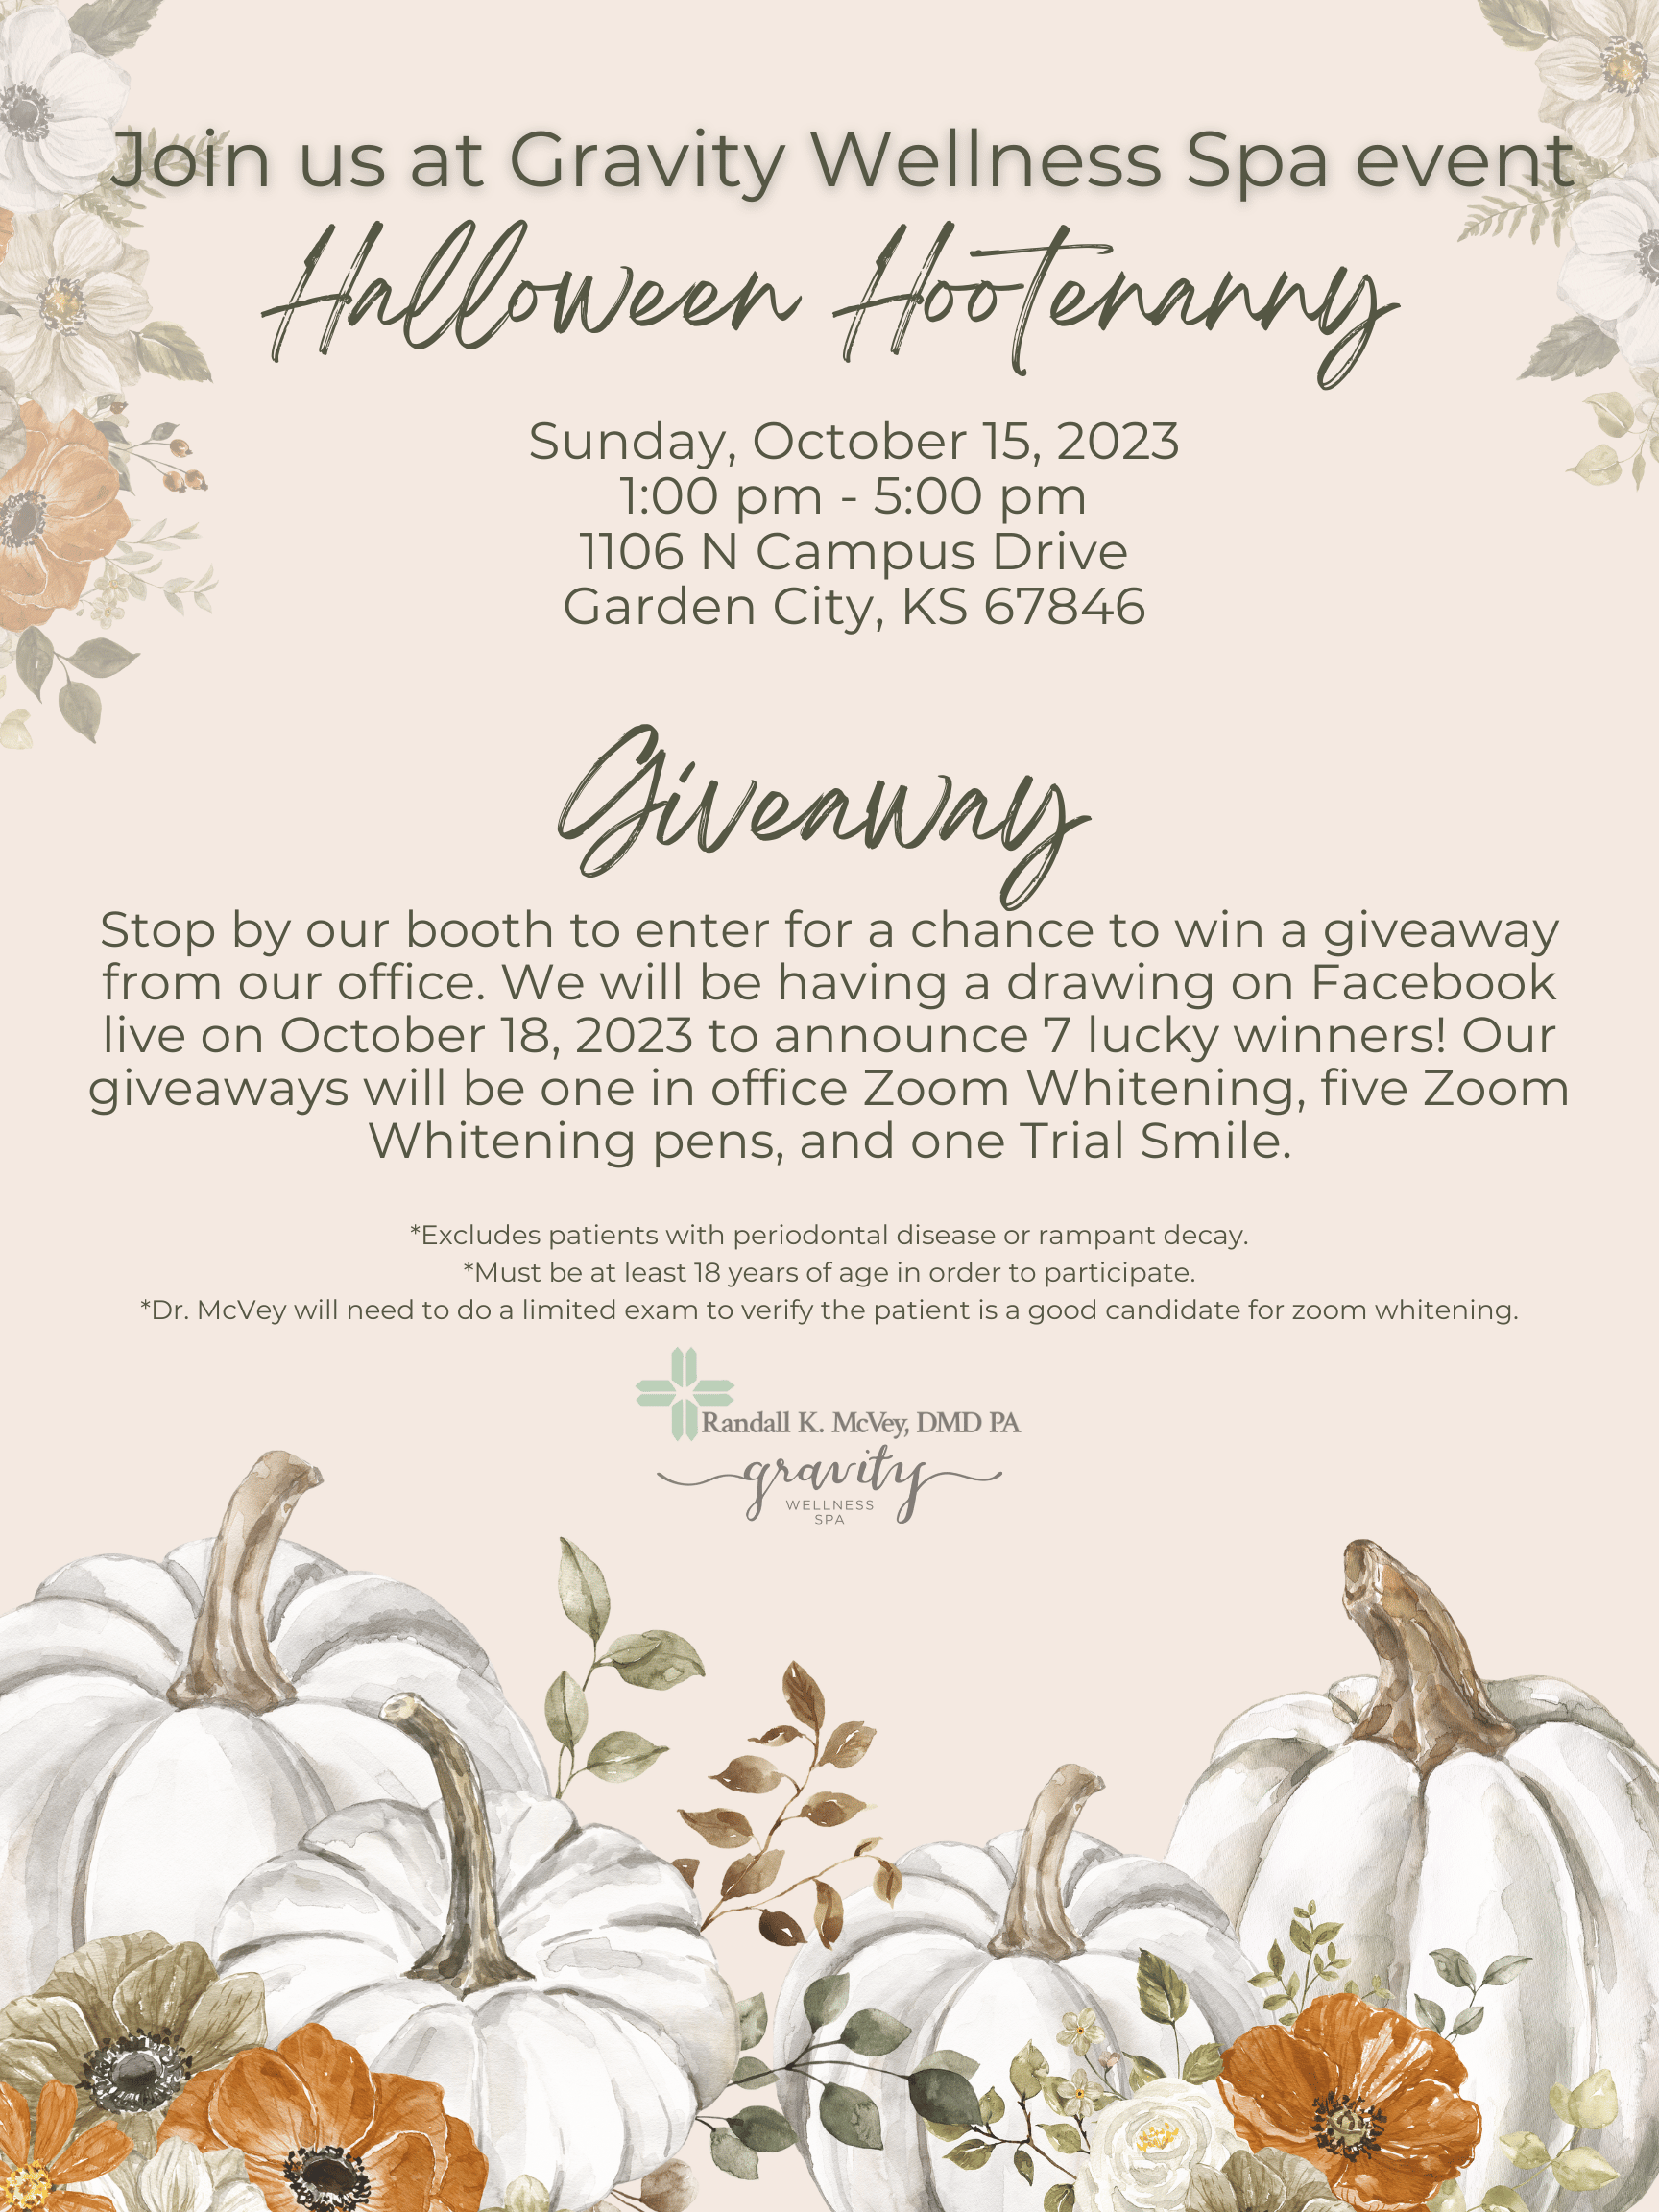 t's time for the annual Halloween Hootenanny at the Gravity Wellness Spa. We are thrilled to announce that Dr. McVey and Staff will be part of this spook-tacular event! Mark your calendars for Sunday, October 15, 2023, from 1:00 pm to 5:00 pm, at 1106 N Campus Drive, Garden City, KS 67846. We invite everyone to stop by our booth, where you can meet our dedicated team, learn more about our services, and join in the Halloween fun. But that's not all! We're also hosting an exciting giveaway that you won't want to miss.